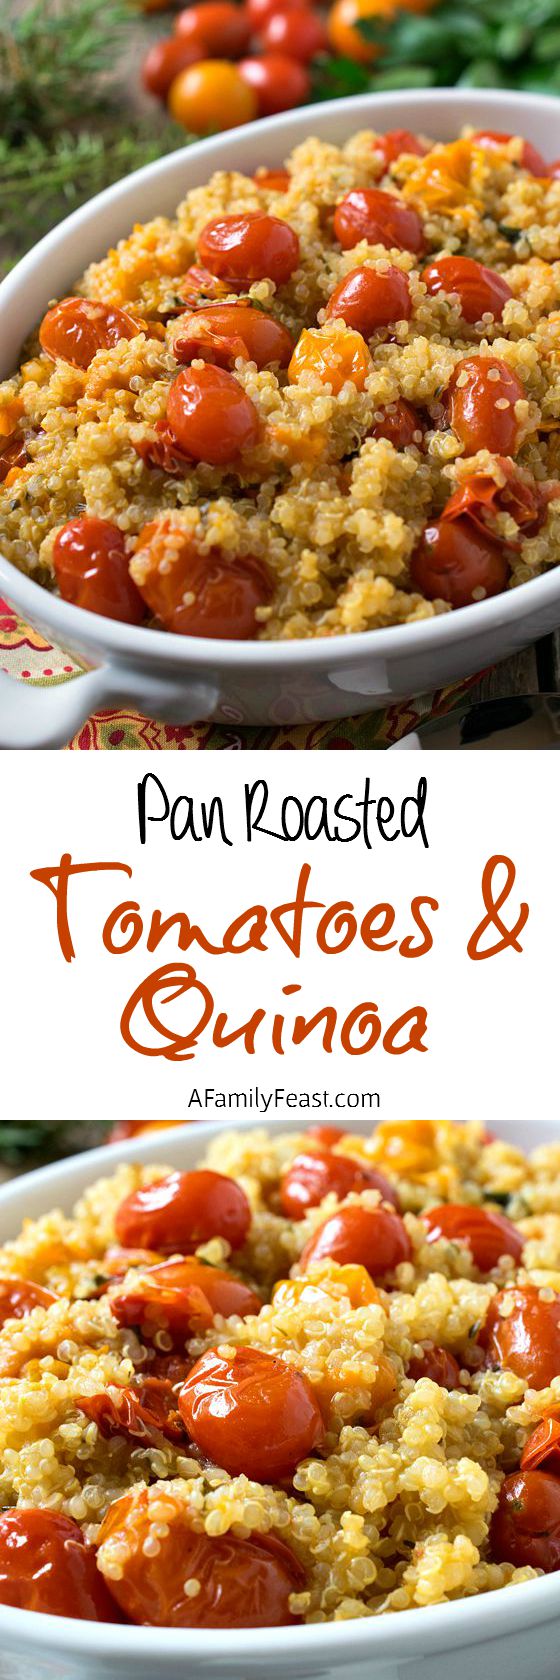 Pan Roasted Tomatoes with Quinoa - An easy and super flavorful way to prepare quinoa. Delicious as a side dish or as a light, meatless meal.